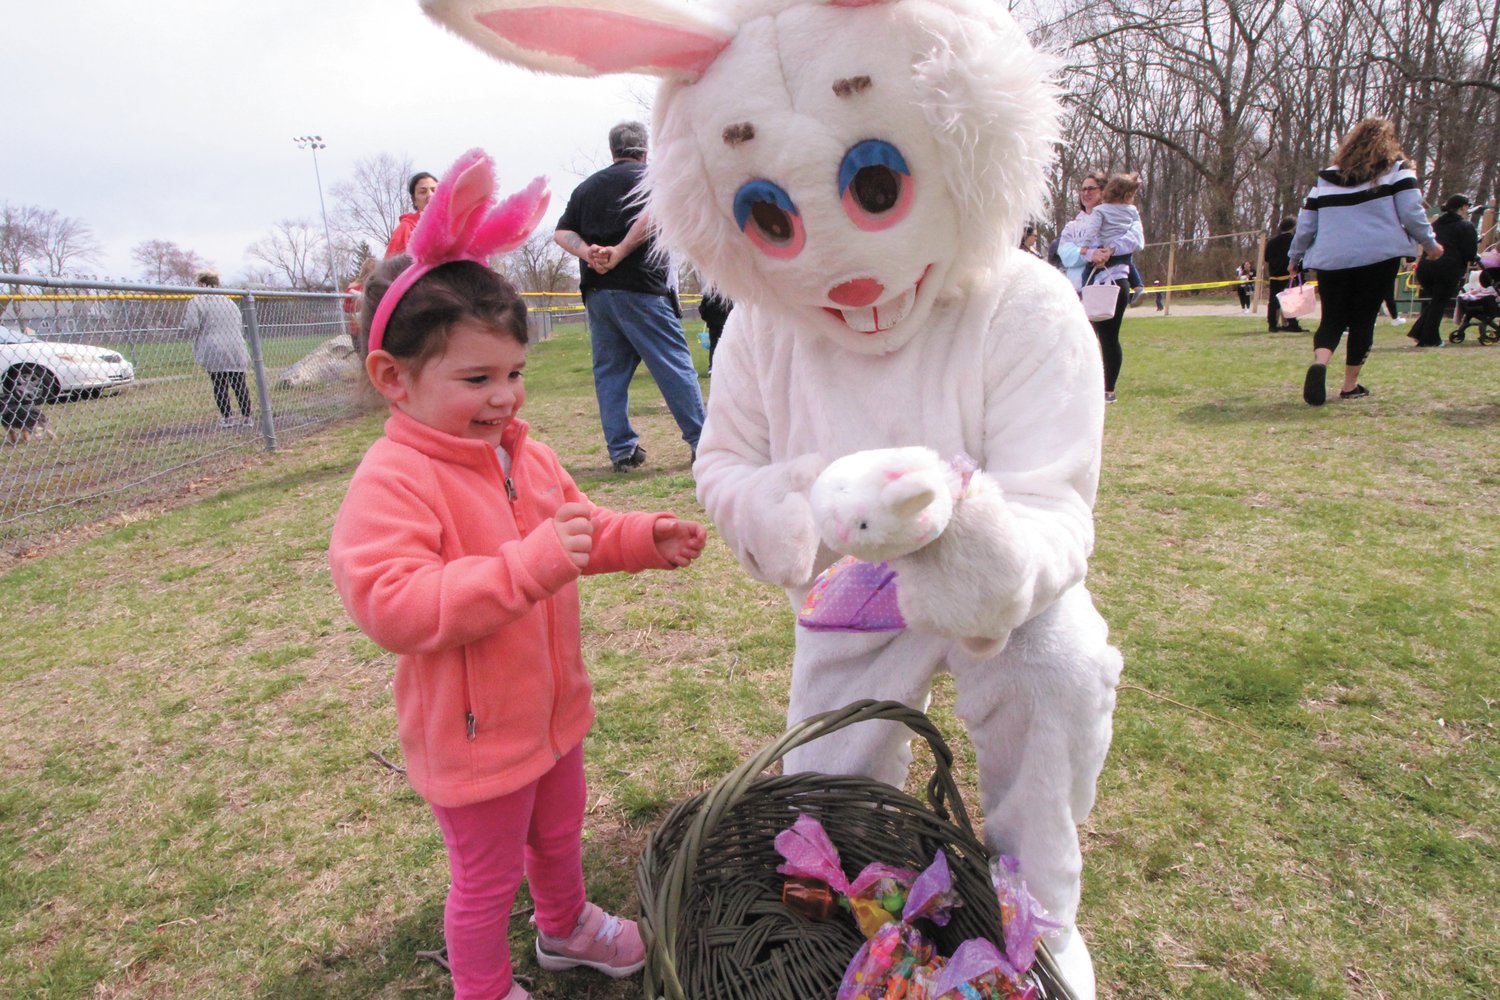 BUNNY FOR A BUNNY: Three-year old Catherine Barbeau offered to give her bunny to the Easter Bunning at the Conimicut Village hunt. (Warwick Beacon photos)